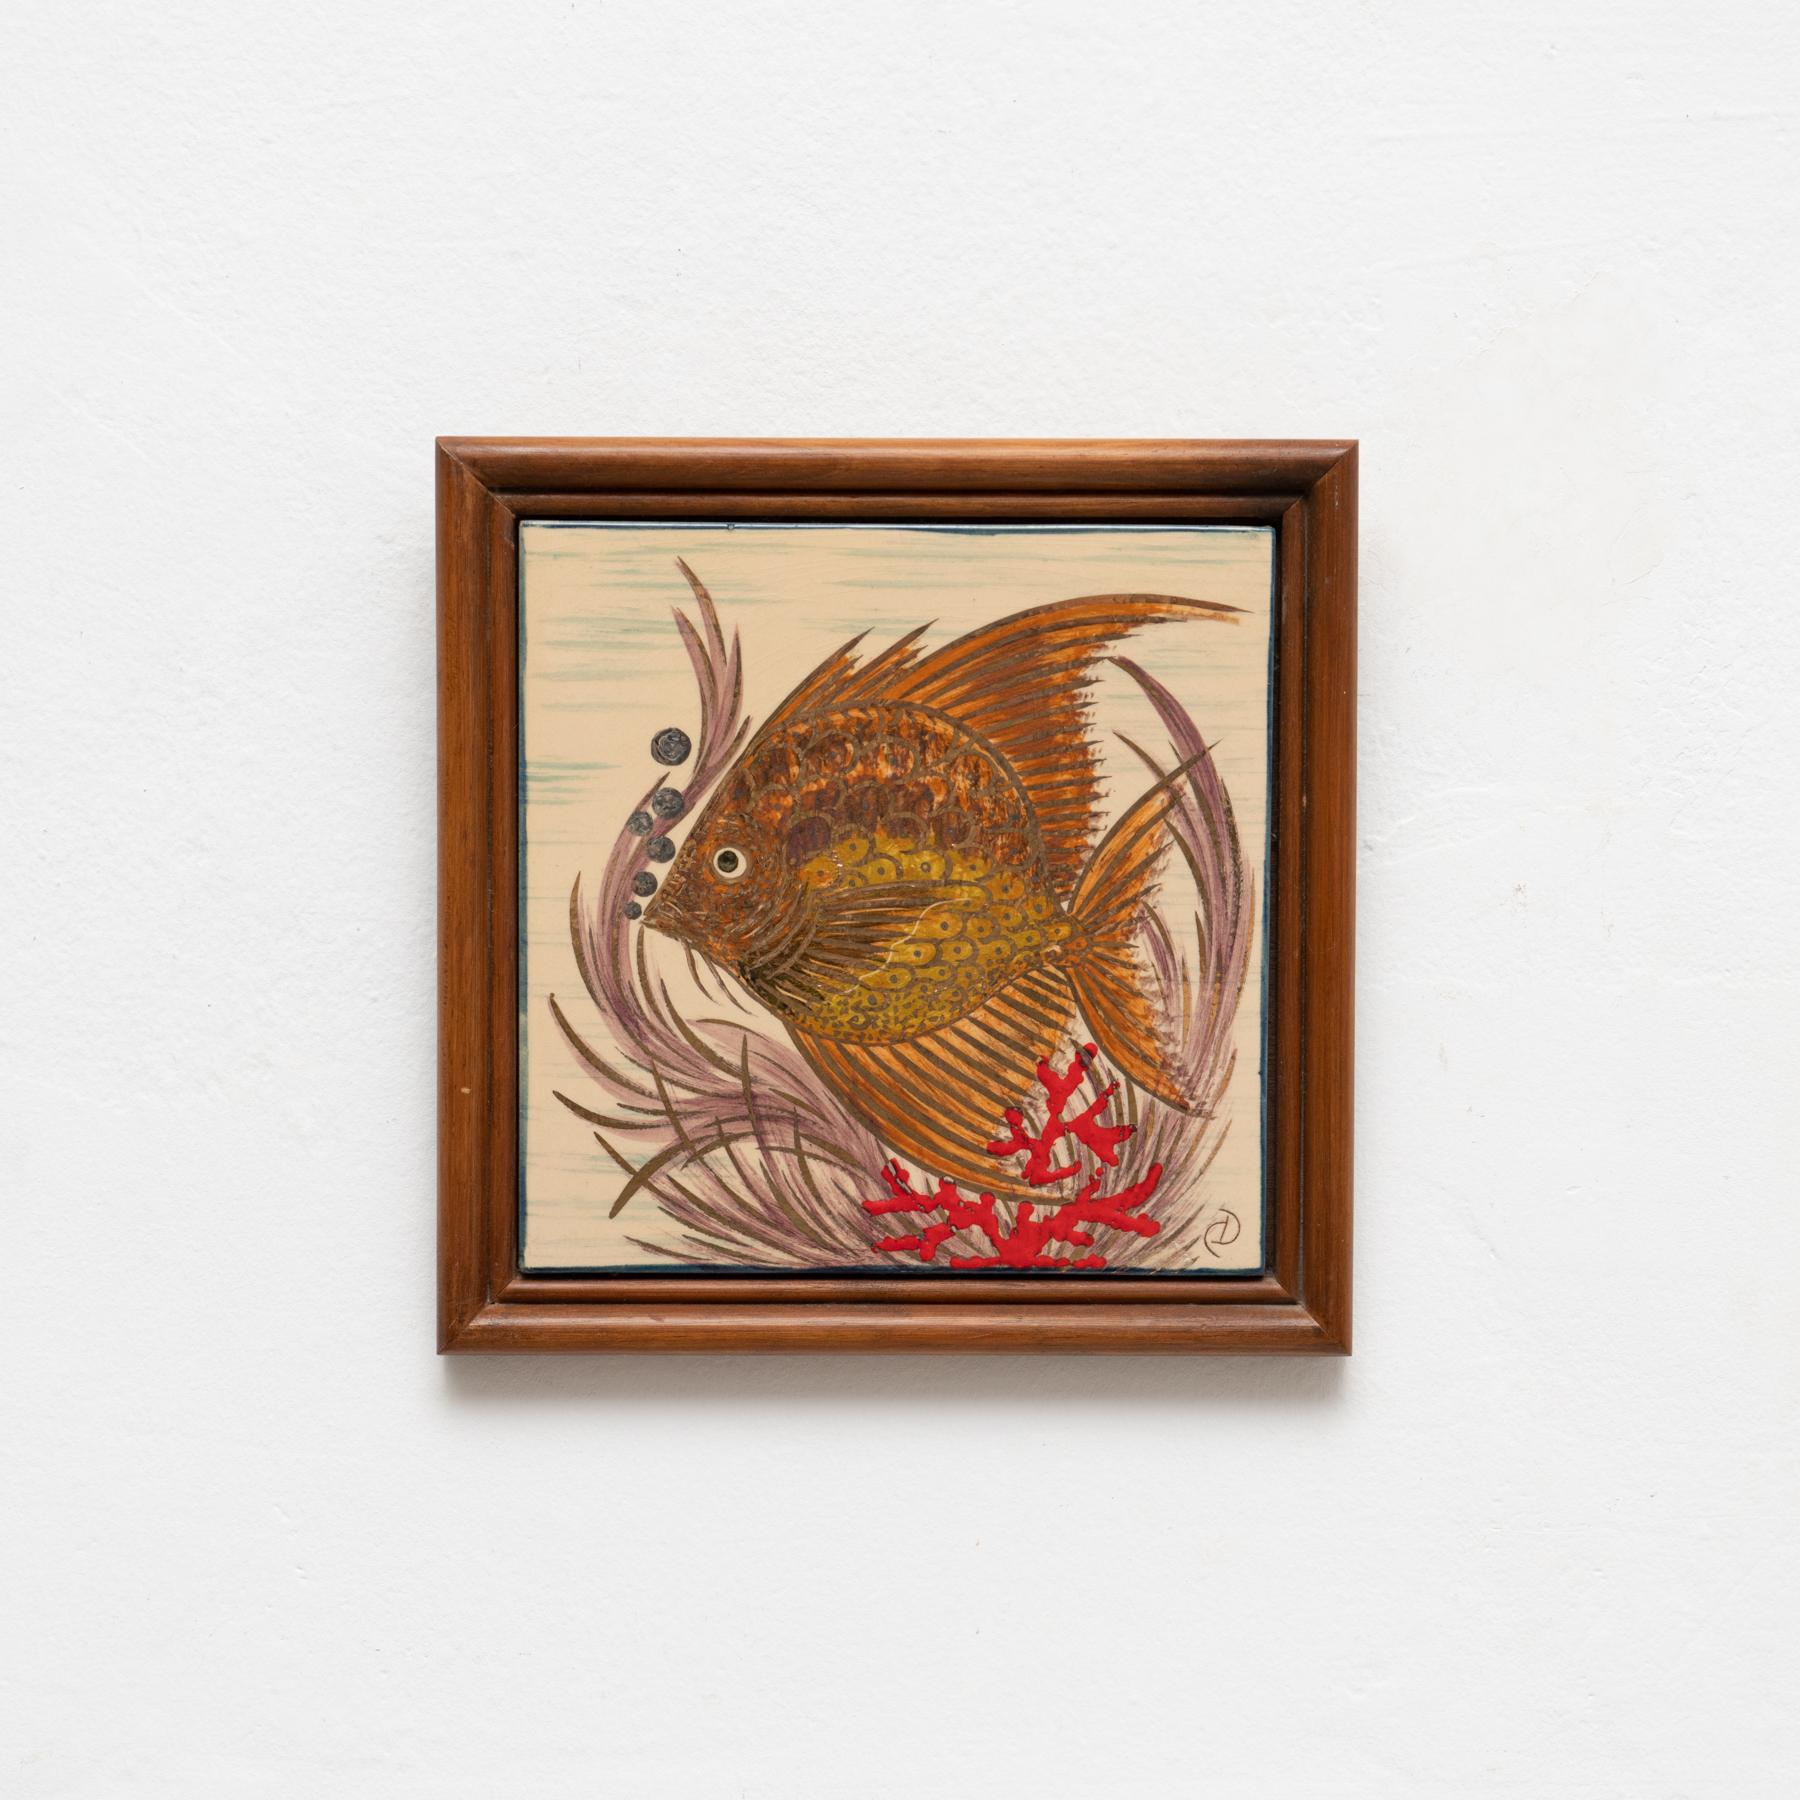 Ceramic hand painted artwork of a fish by Catalan artist Diaz Costa, circa 1960.
Framed. Signed.

In original condition, with minor wear consistent of age and use, preserving a beautiul patina.